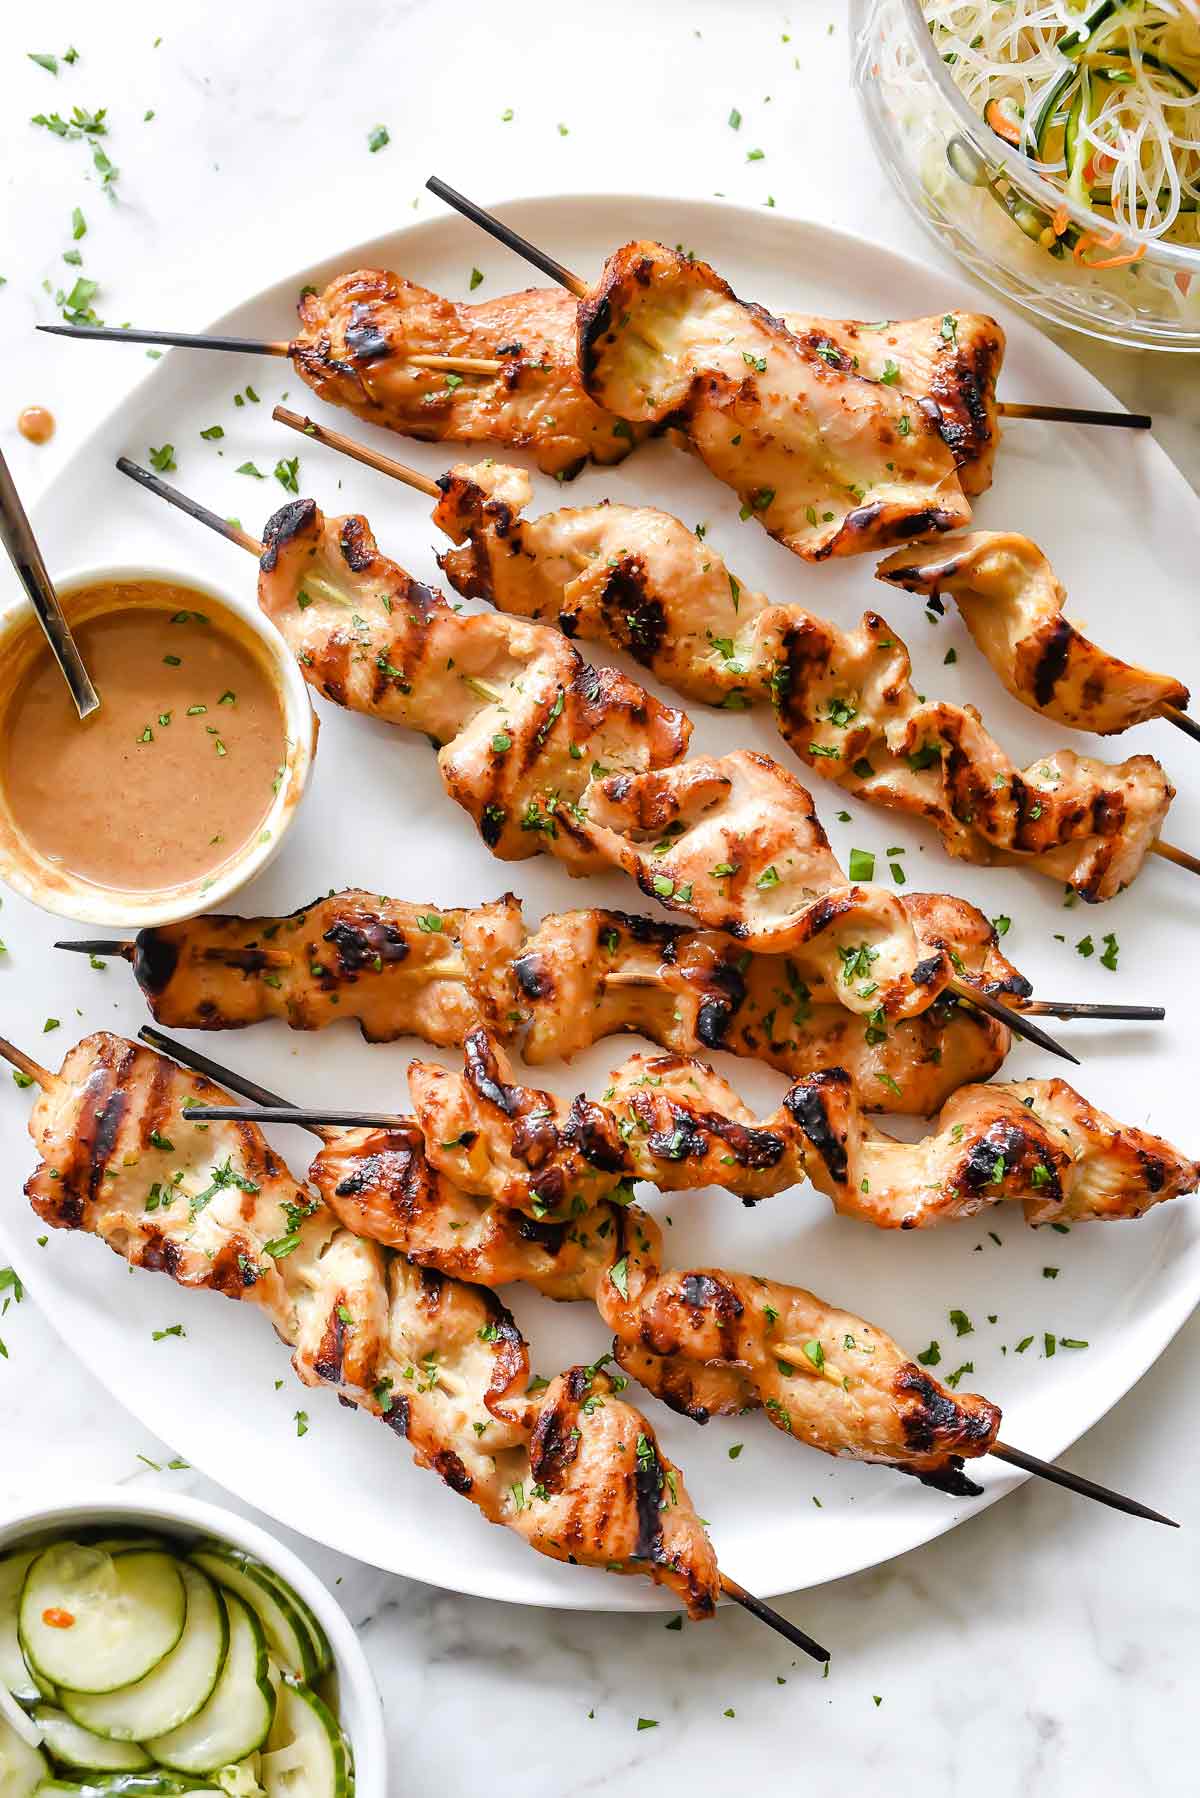 Chicken Satay with Lighter Almond Dipping Sauce from foodiecrush.com on foodiecrush.com